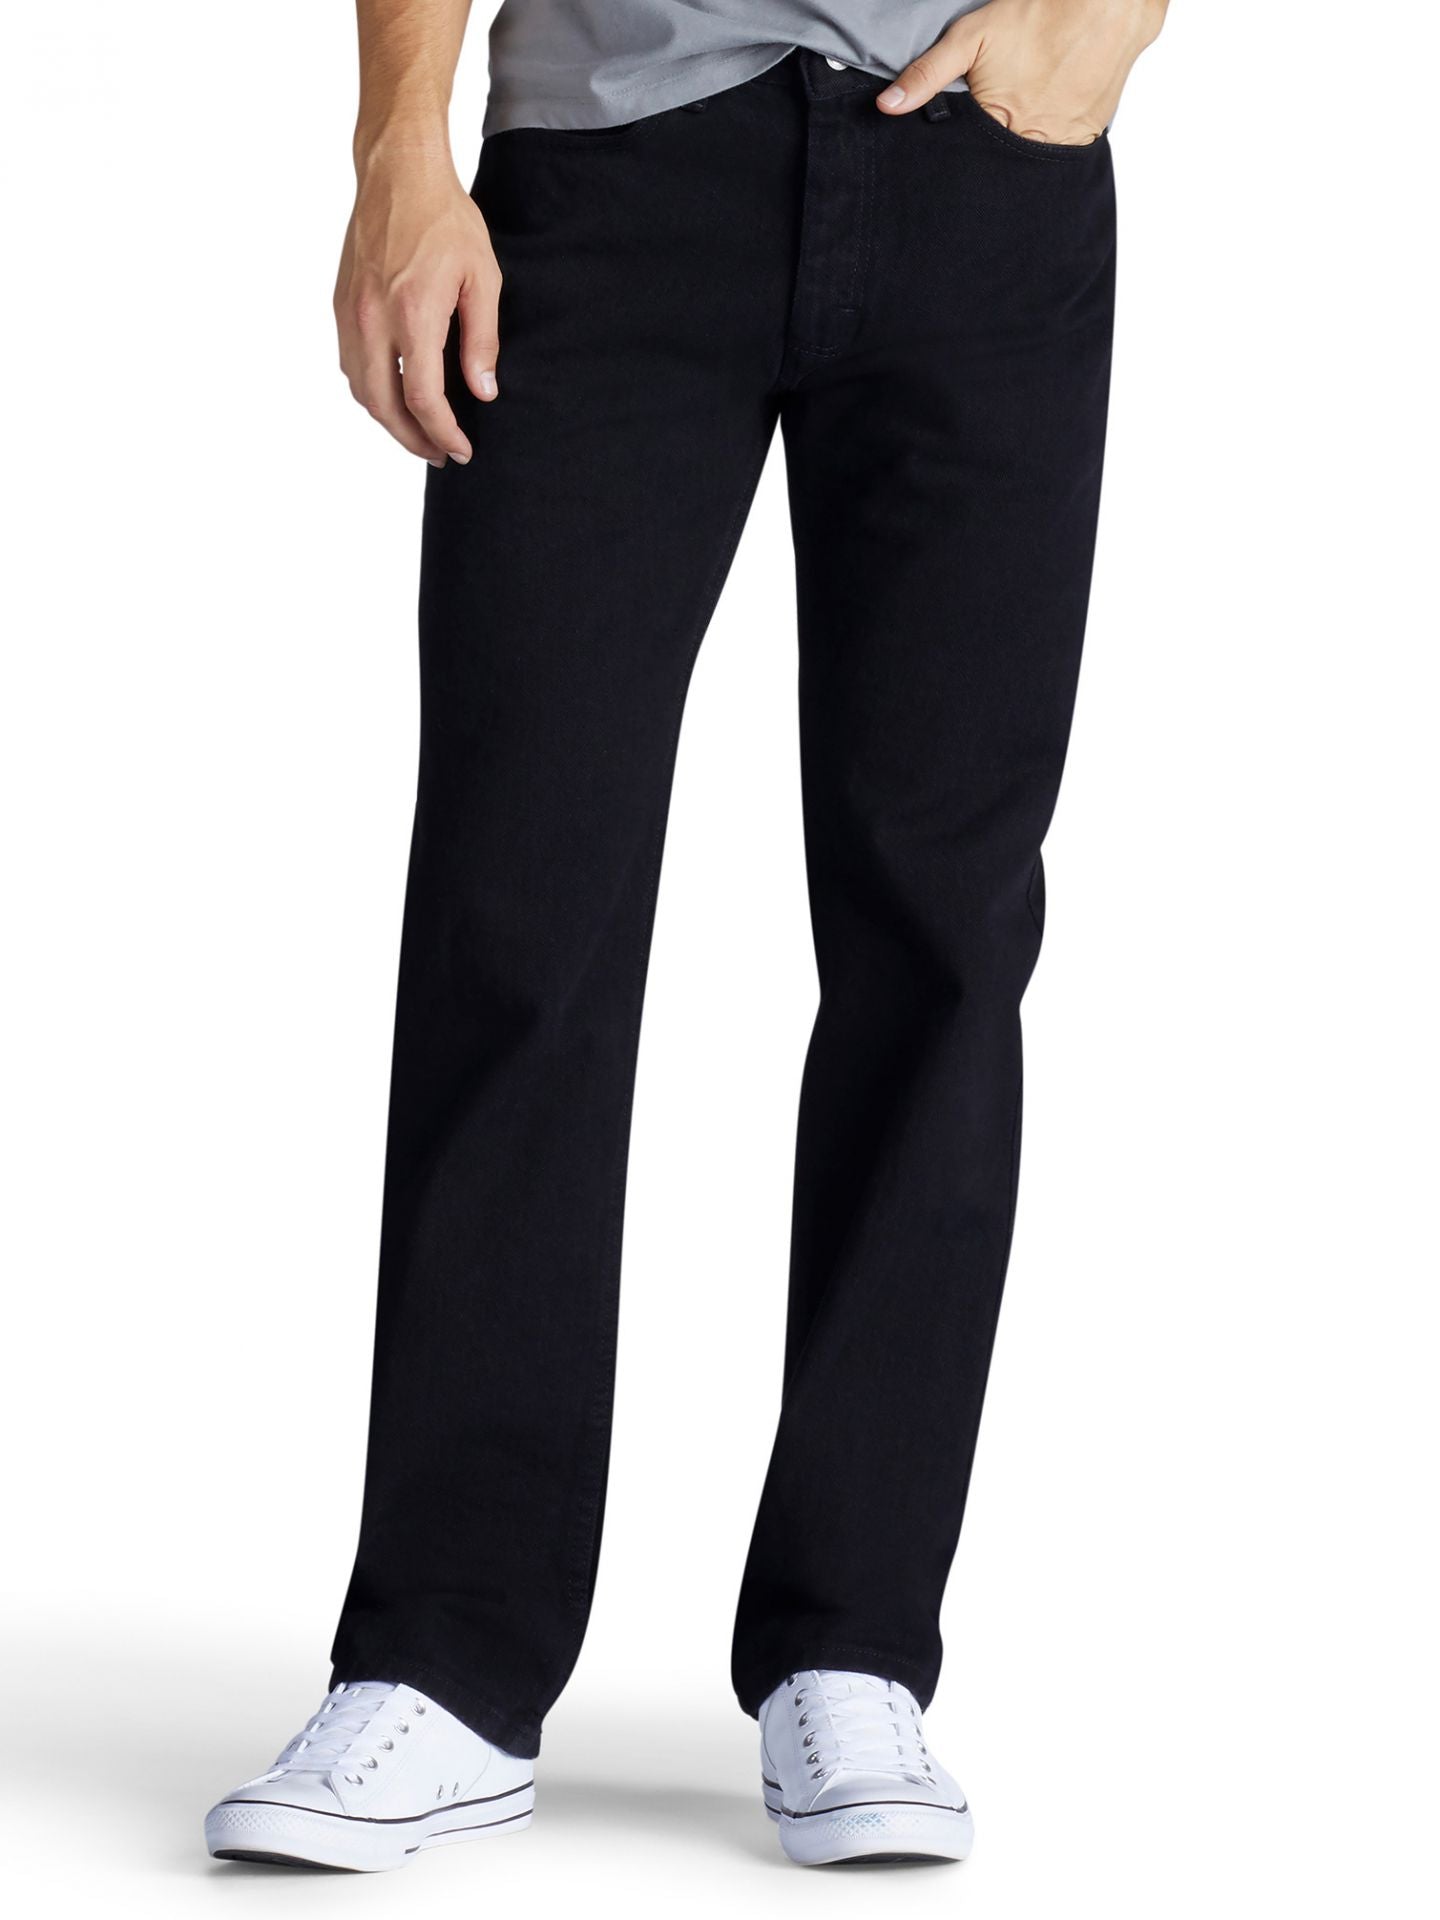 Men's Relaxed Fit Straight Leg Jeans - Double Black